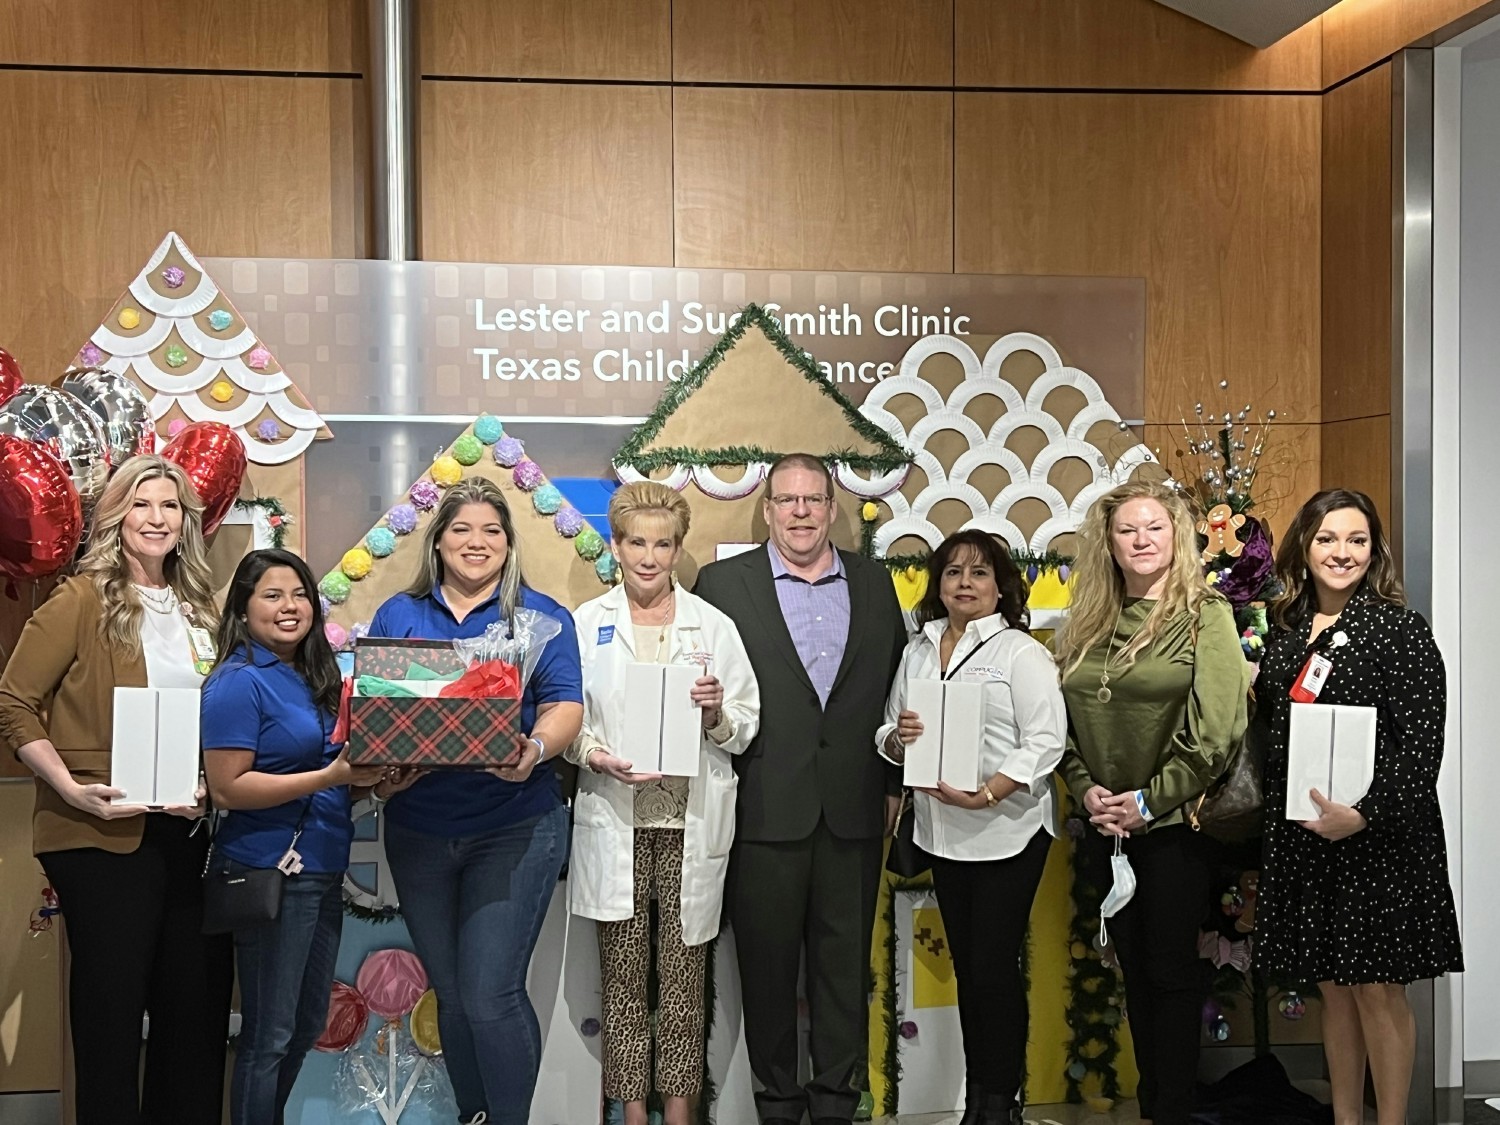 CSI presents donated Laptops to Texas Children's Hospital as part of the CSI Cares Network.